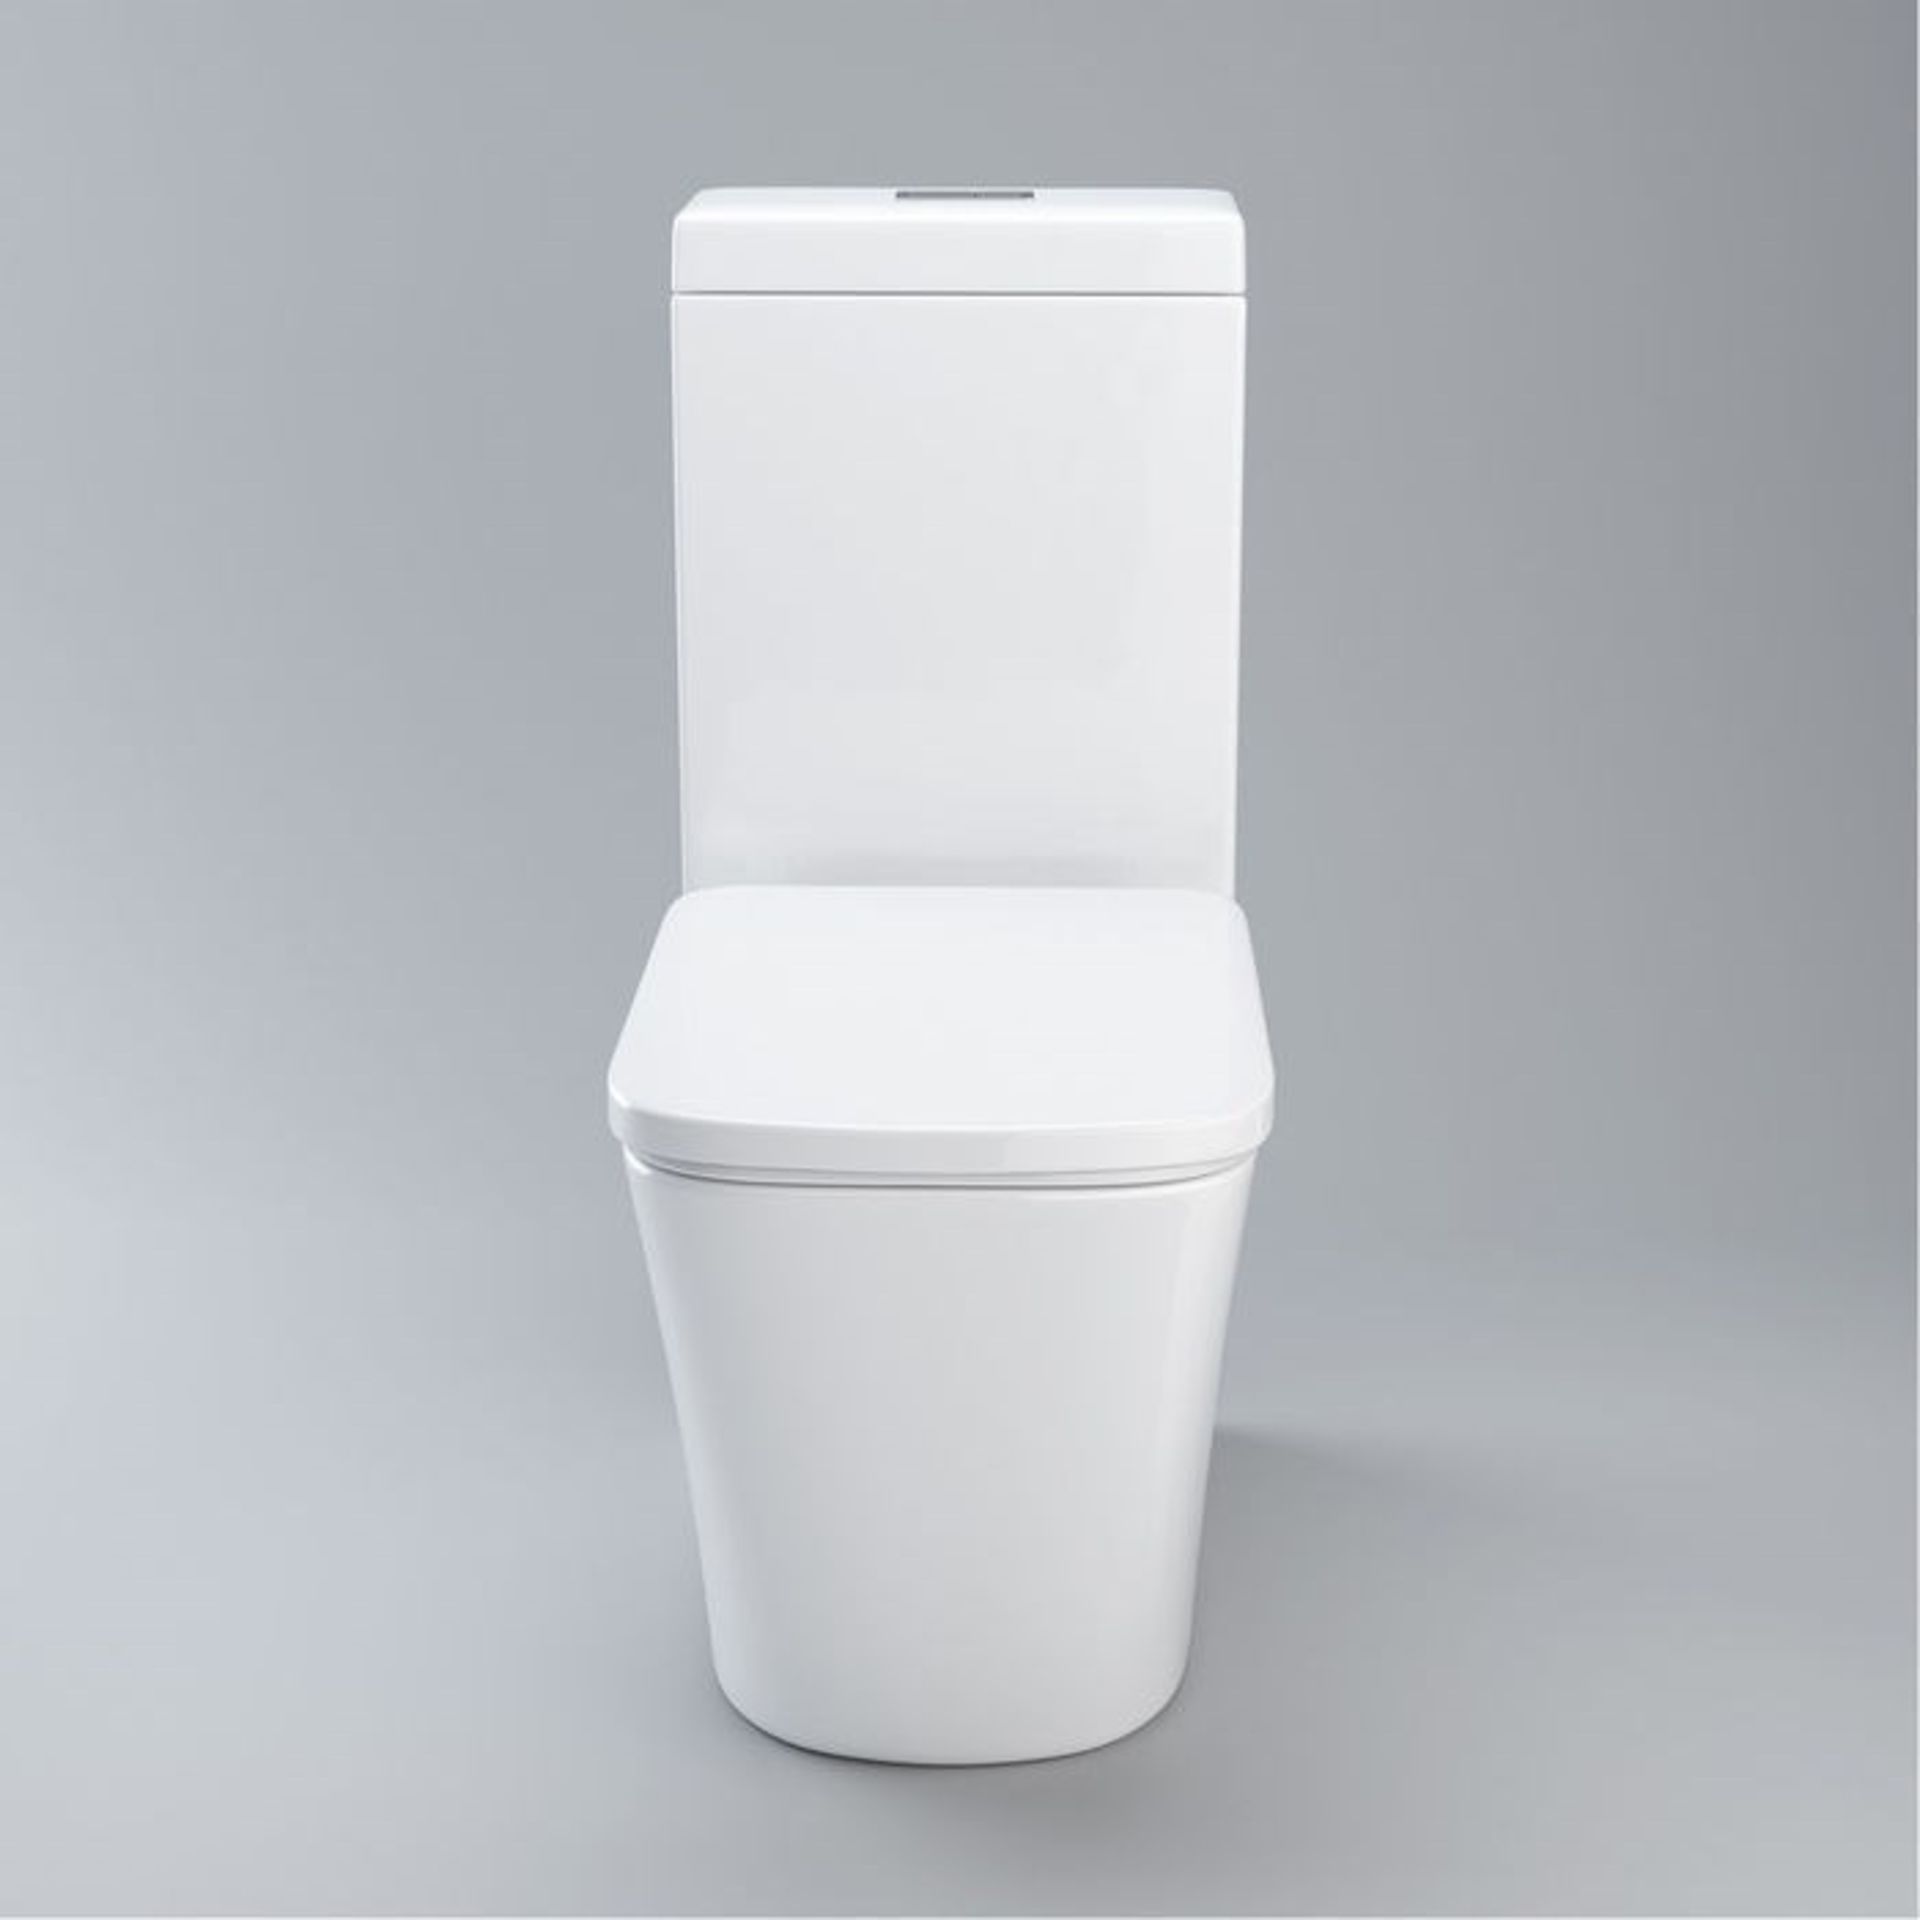 BRAND NEW BOXED Florence Close Coupled Toilet & Cistern inc Soft Close Seat. RRP £499.99.Cont... - Image 3 of 3